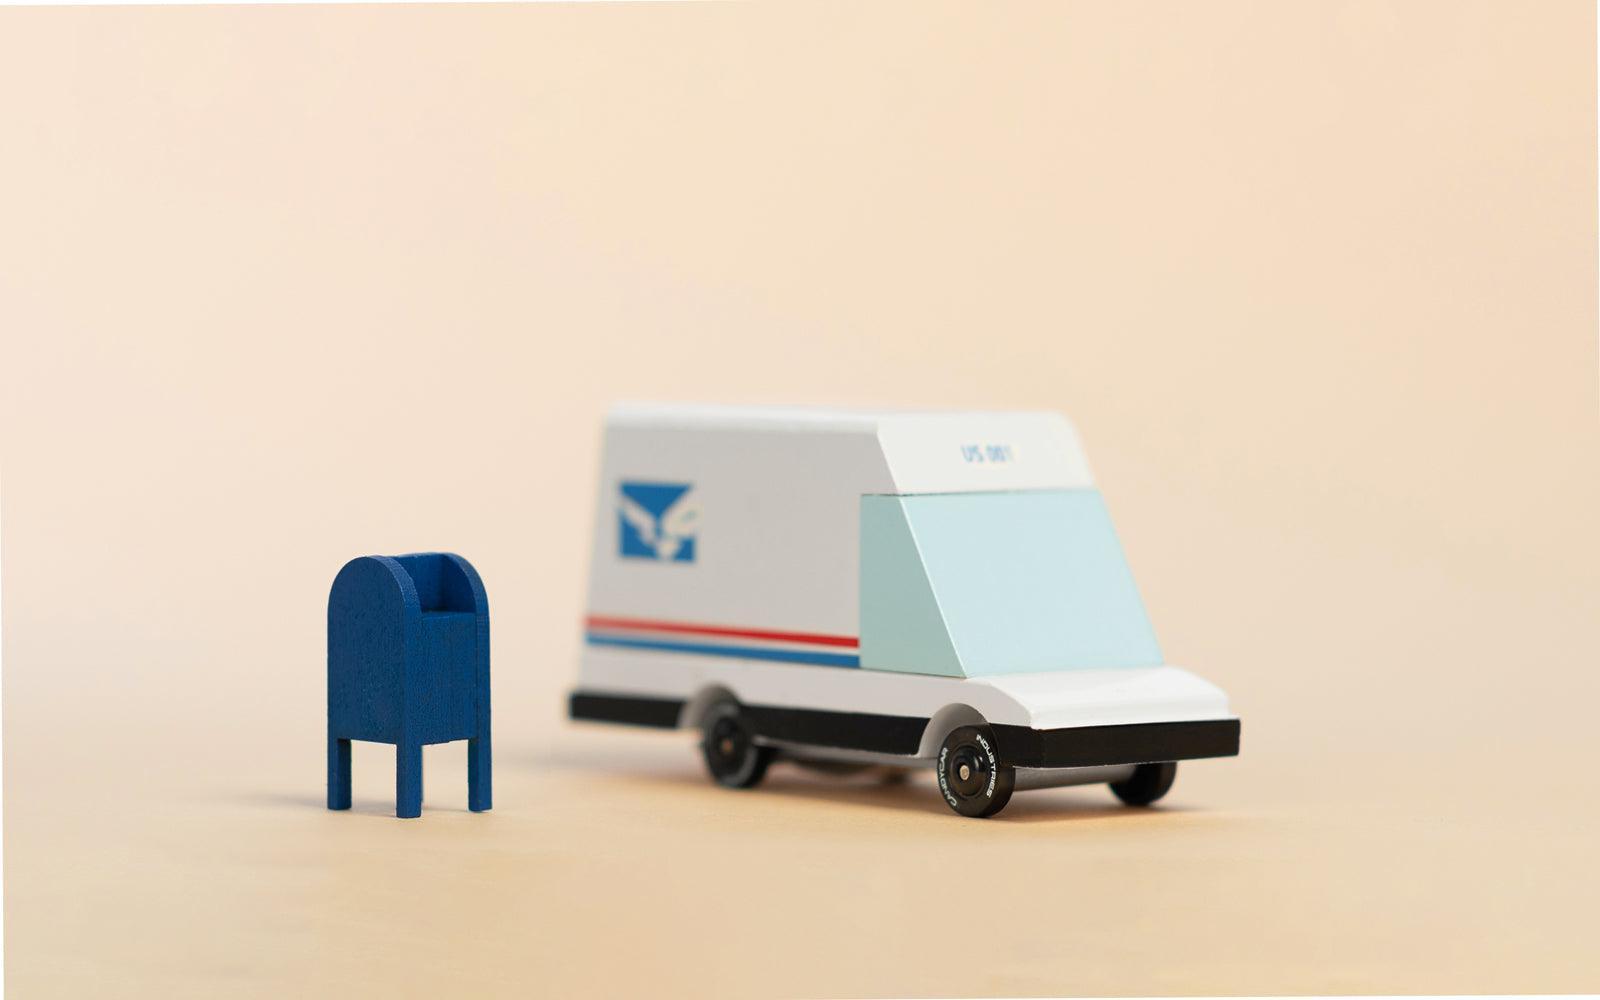 Futuristic Mail Van - Why and Whale